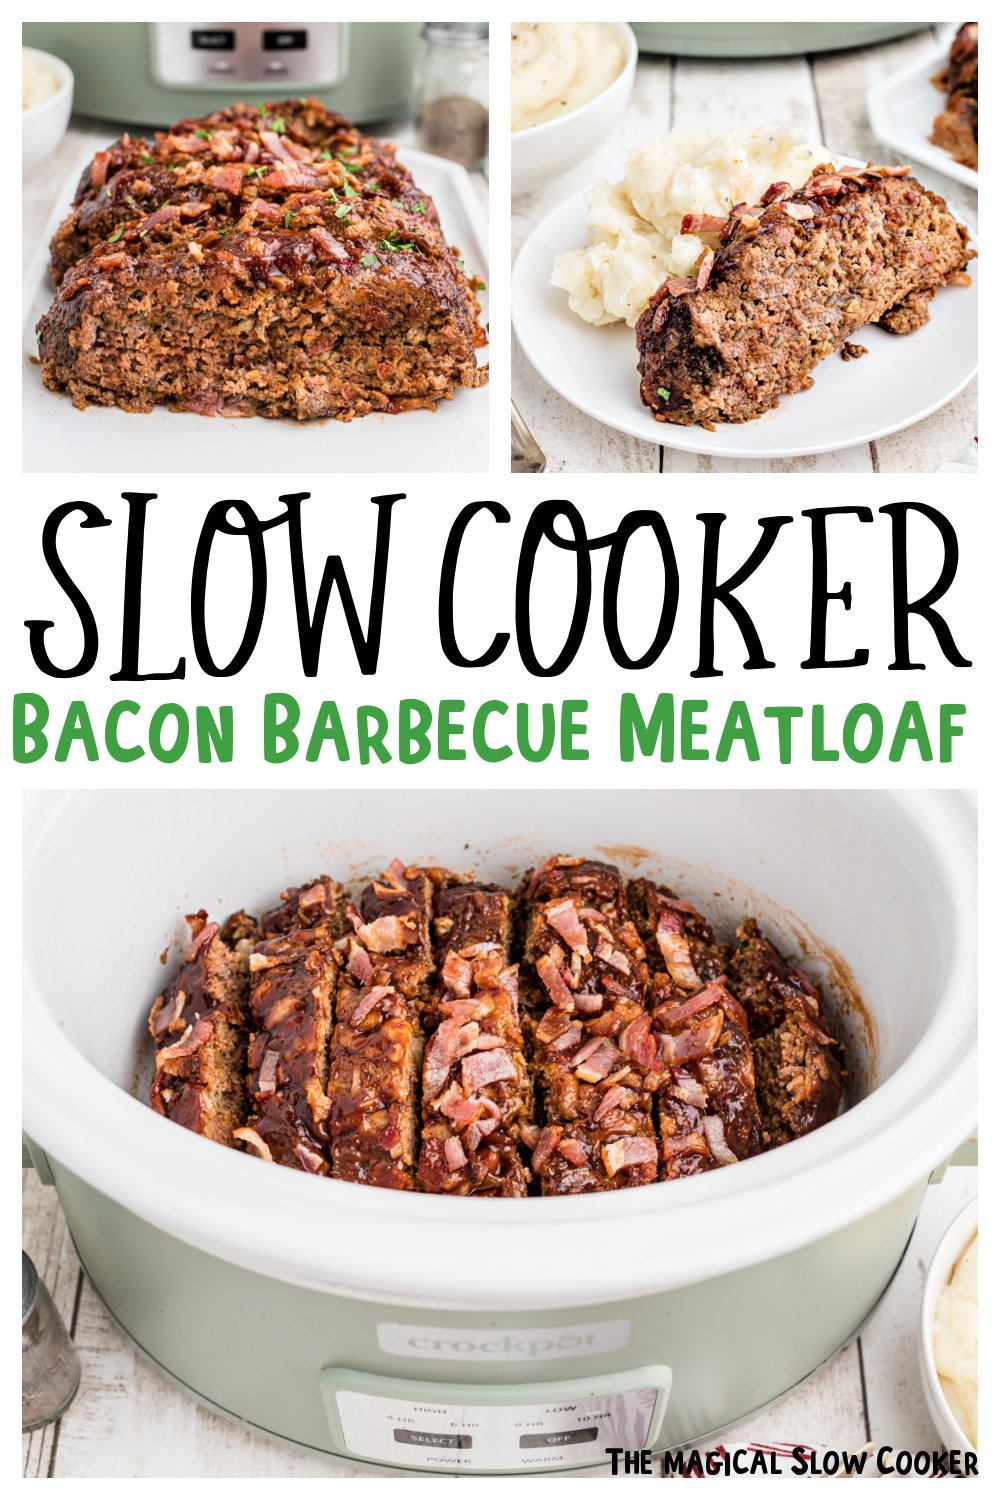 meatloaf images with text for pinterest.